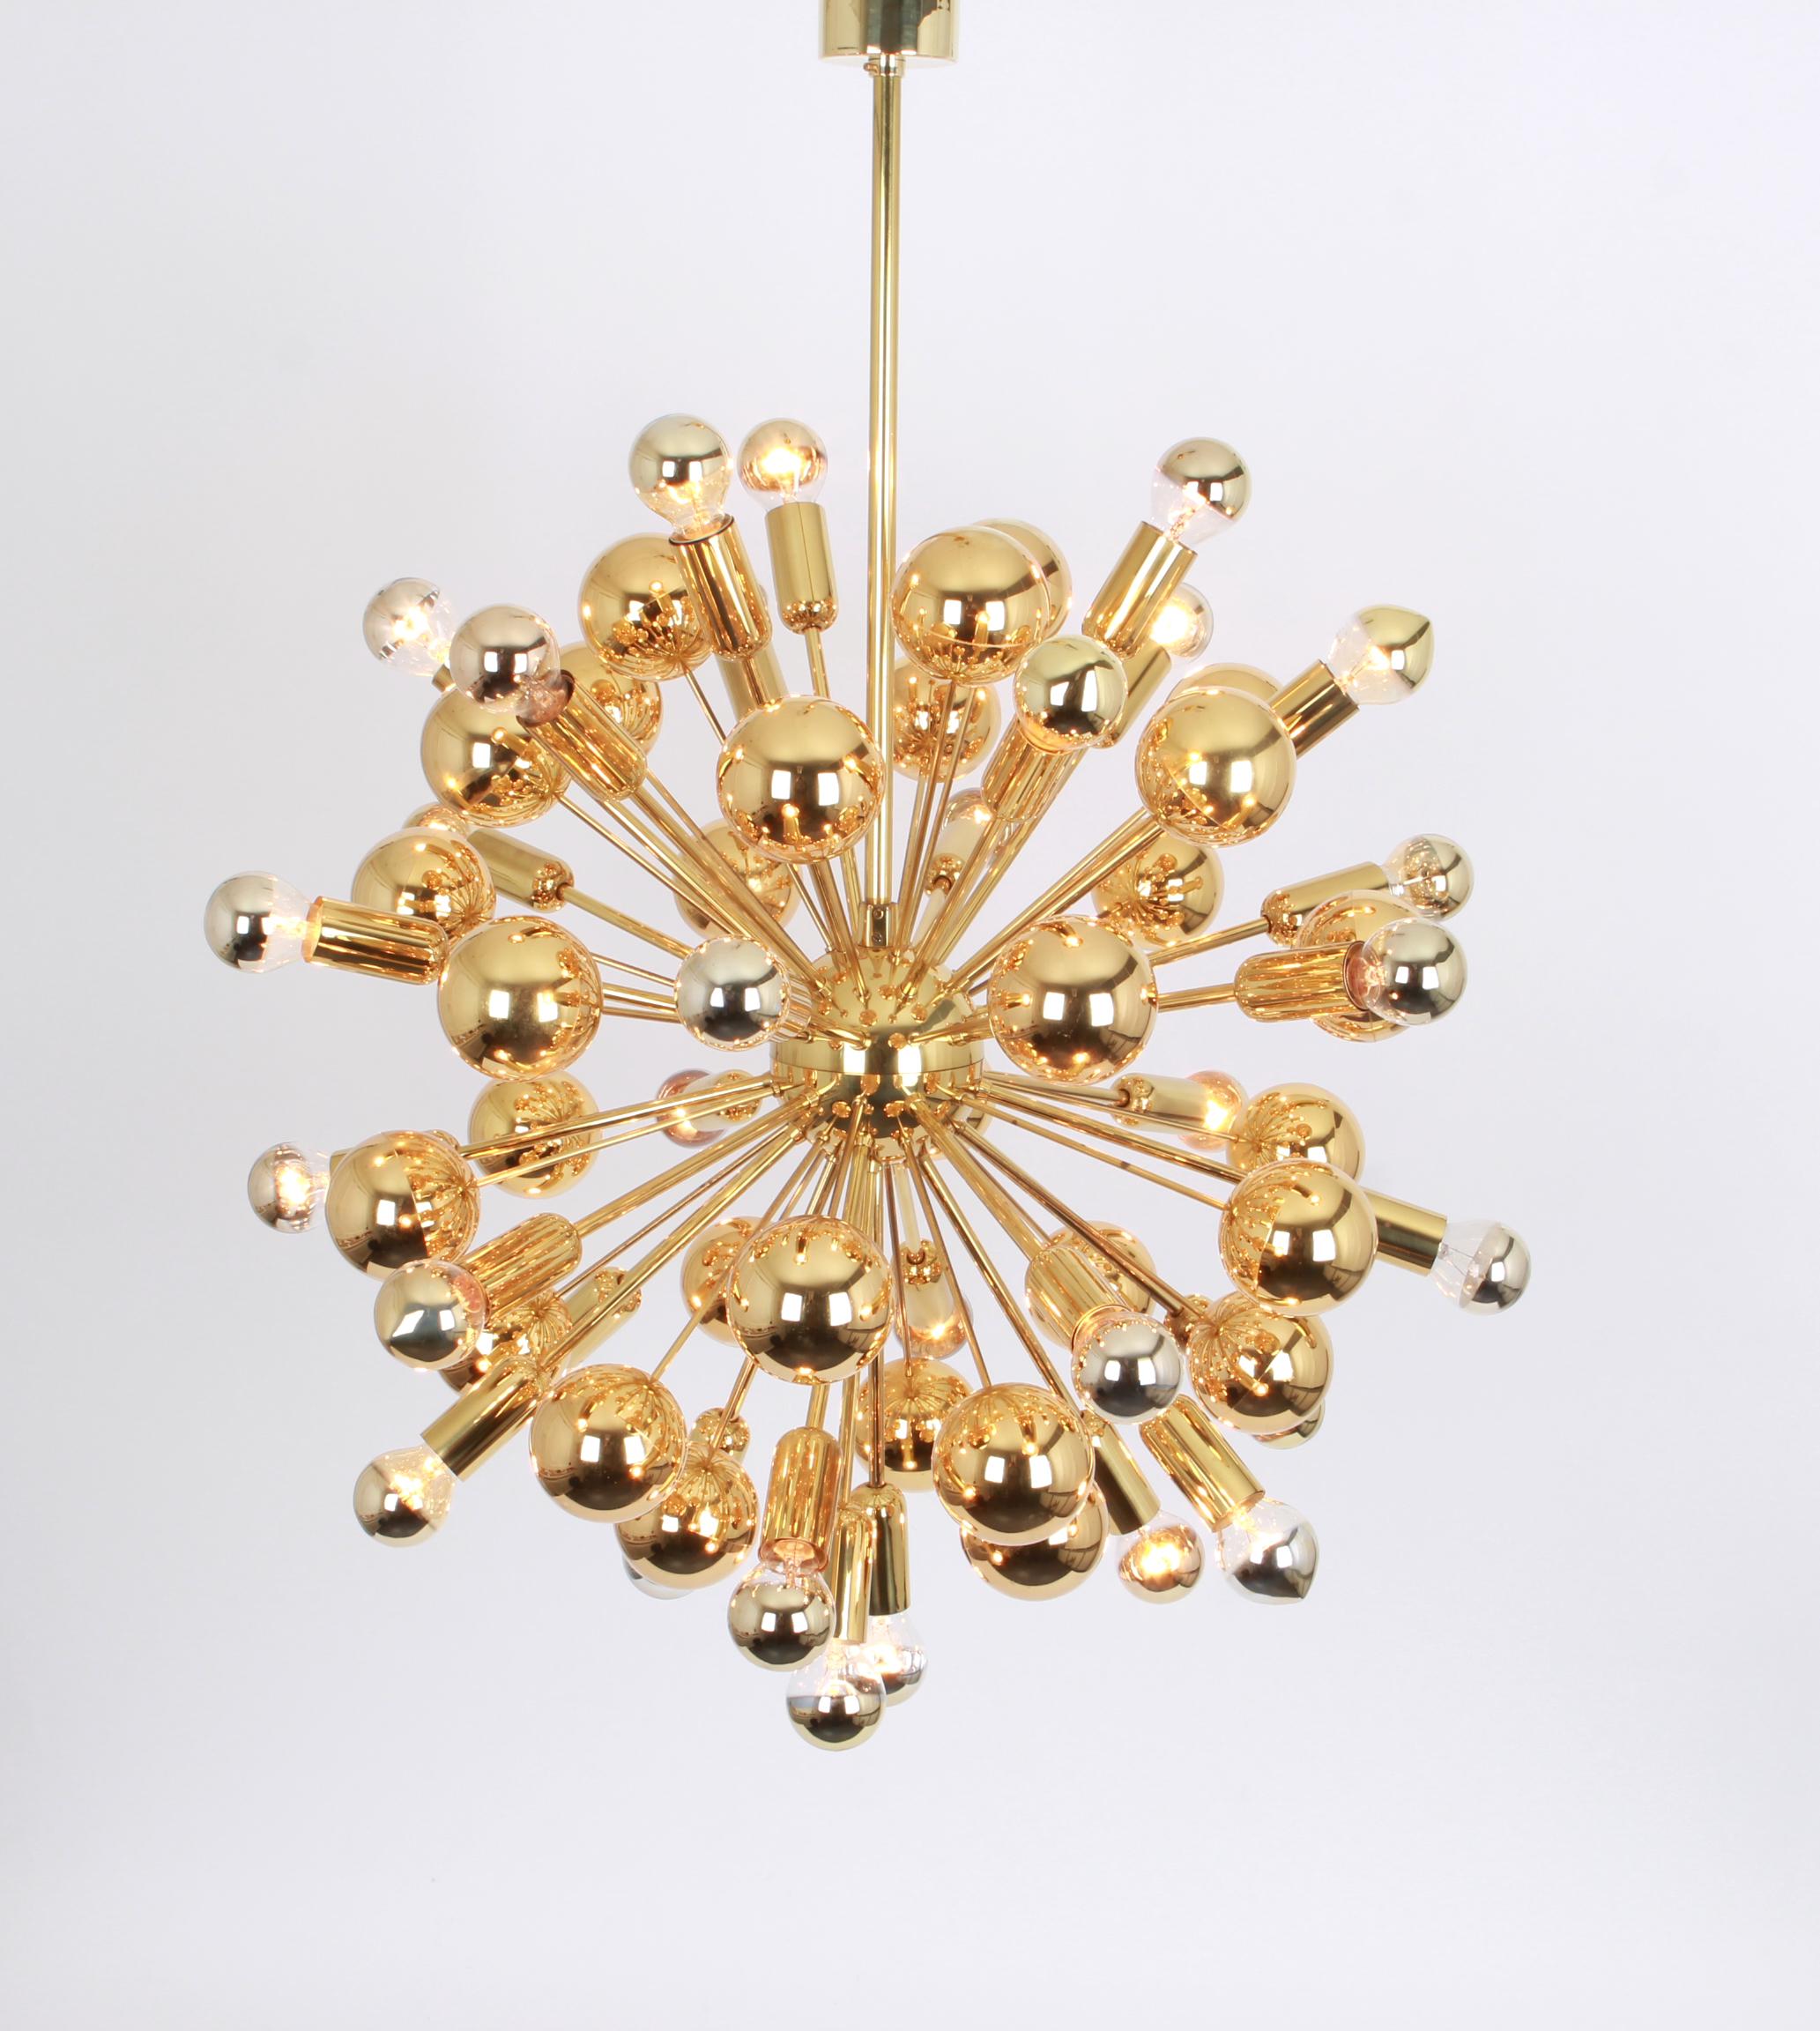 Mid-Century Modern Large Brass Space Age Sputnik Chandelier by Cosack, Germany, 1970s For Sale